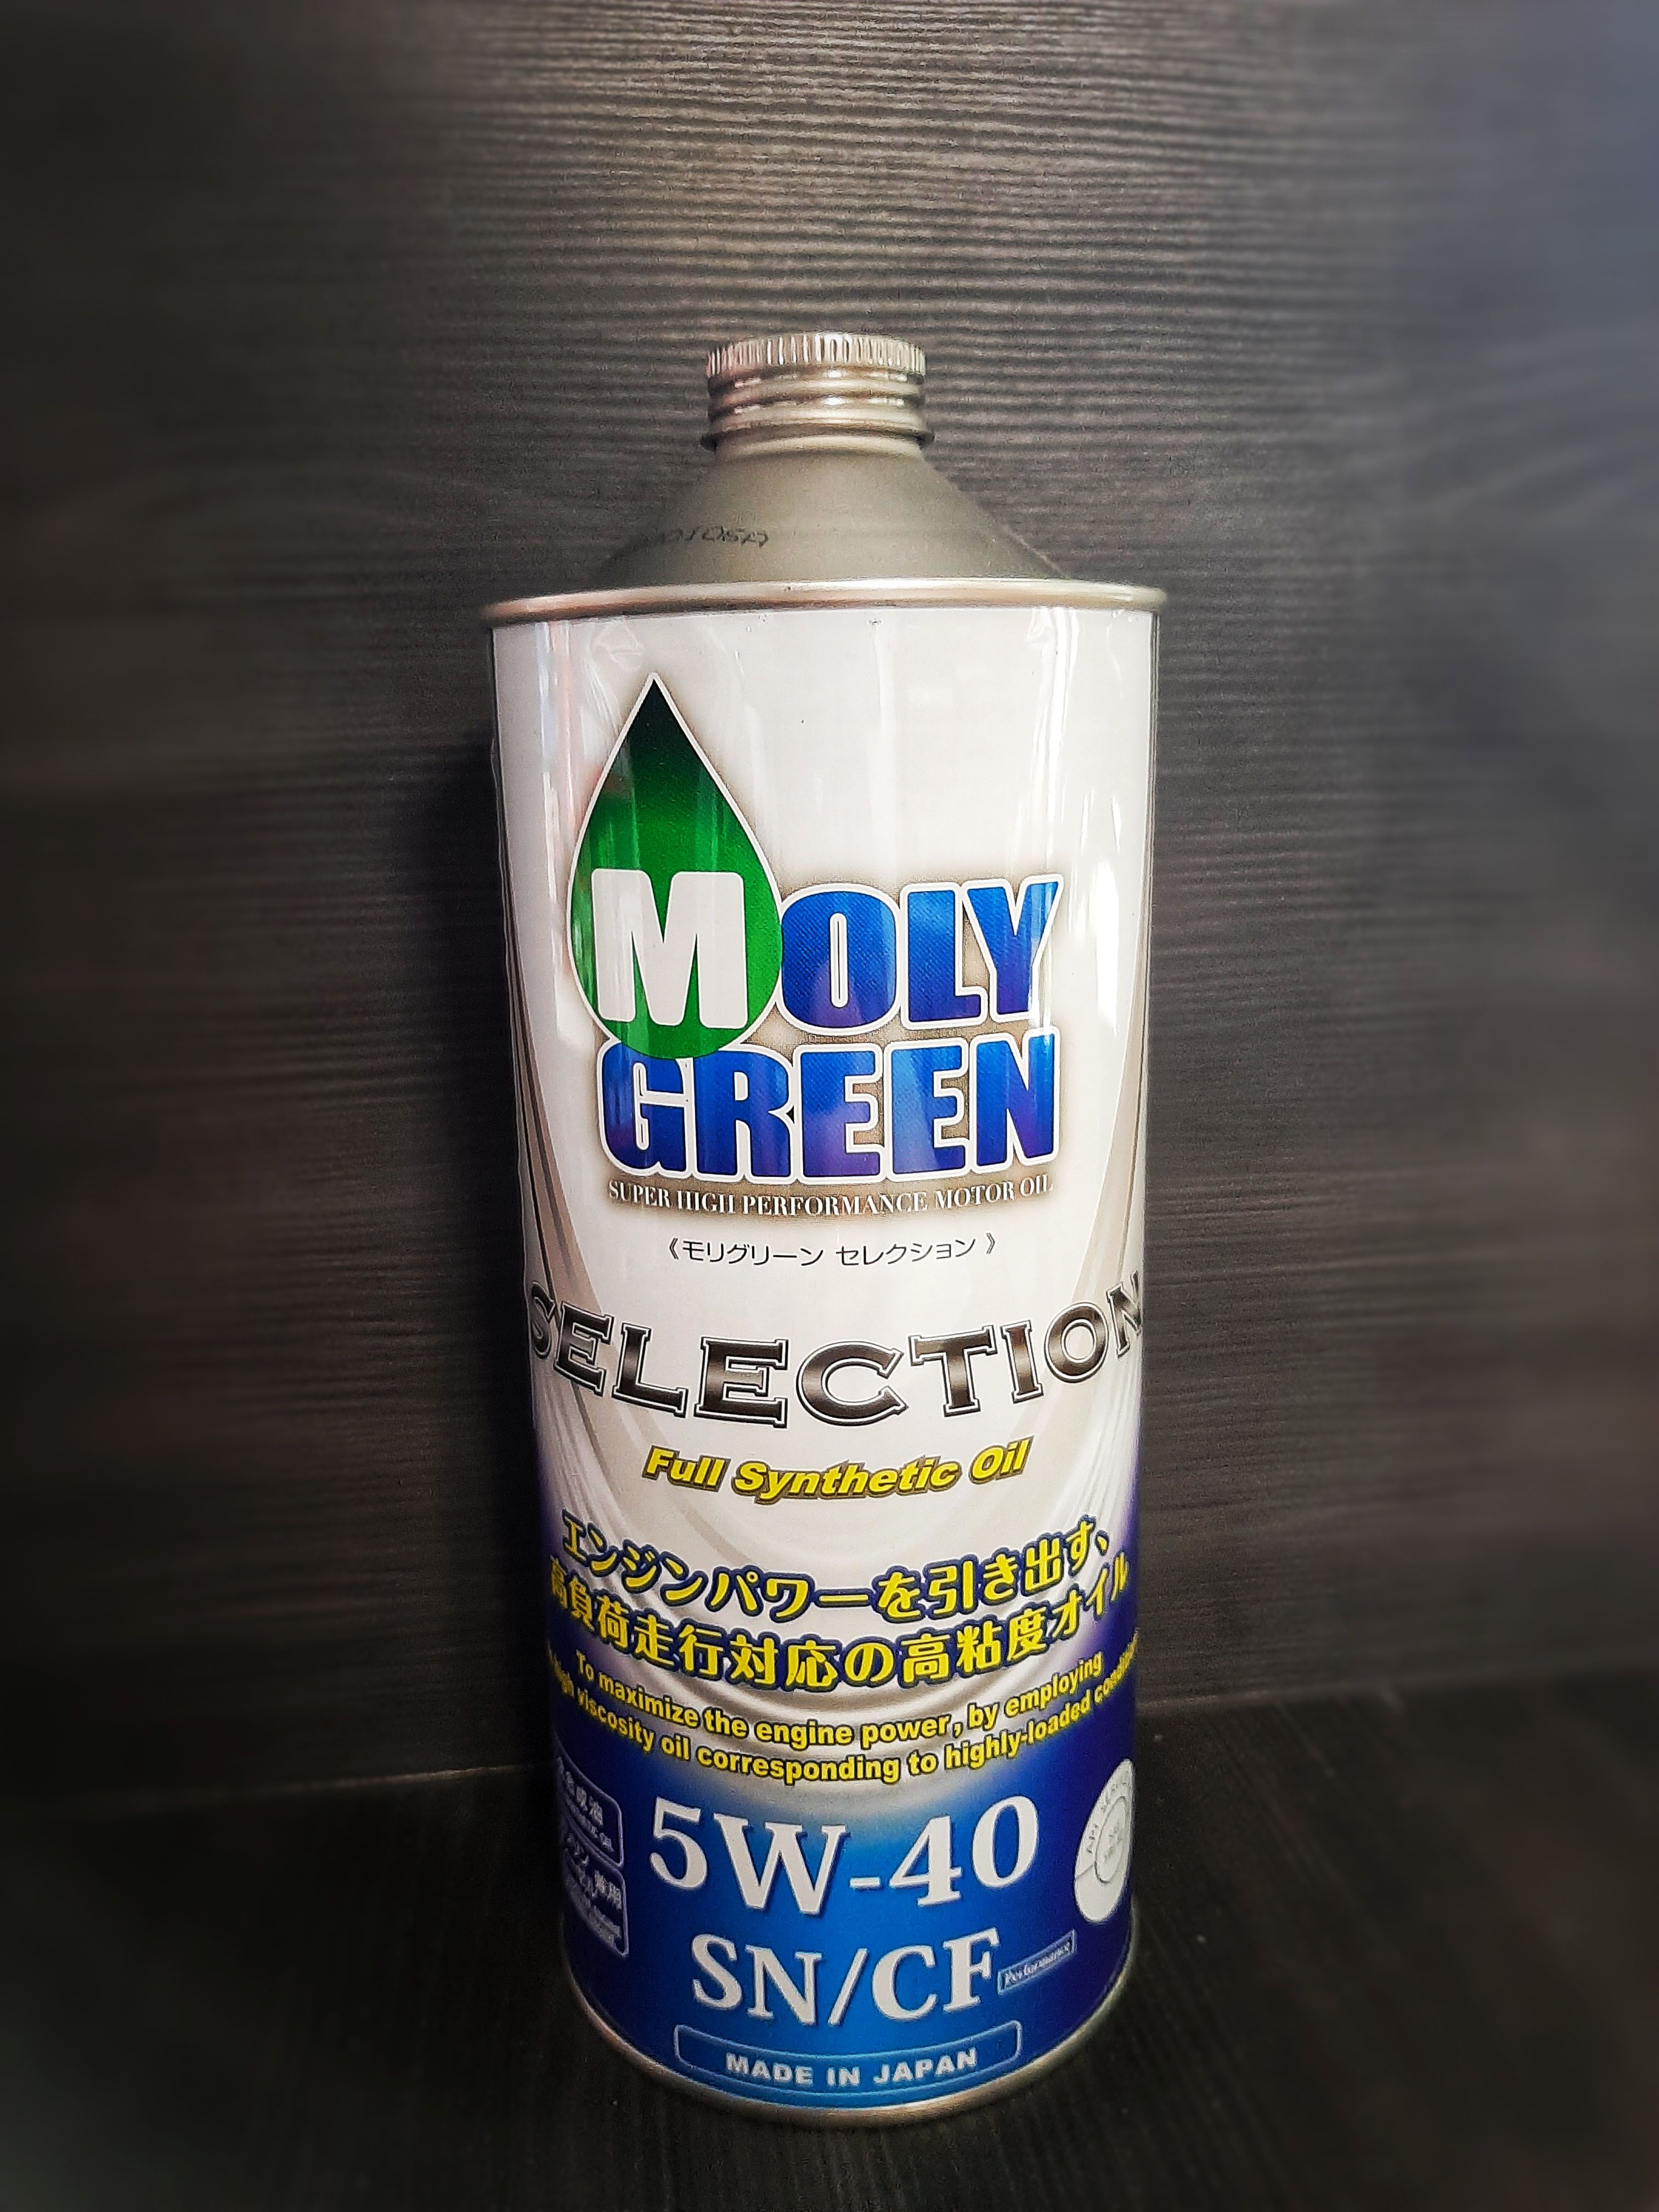 Moly green 5w40. Масло Moly Green 5w40. MOLYGREEN Suspension Fluid 1л 0470149. Moly Green selection 5w40. Масло моли ген открытый.